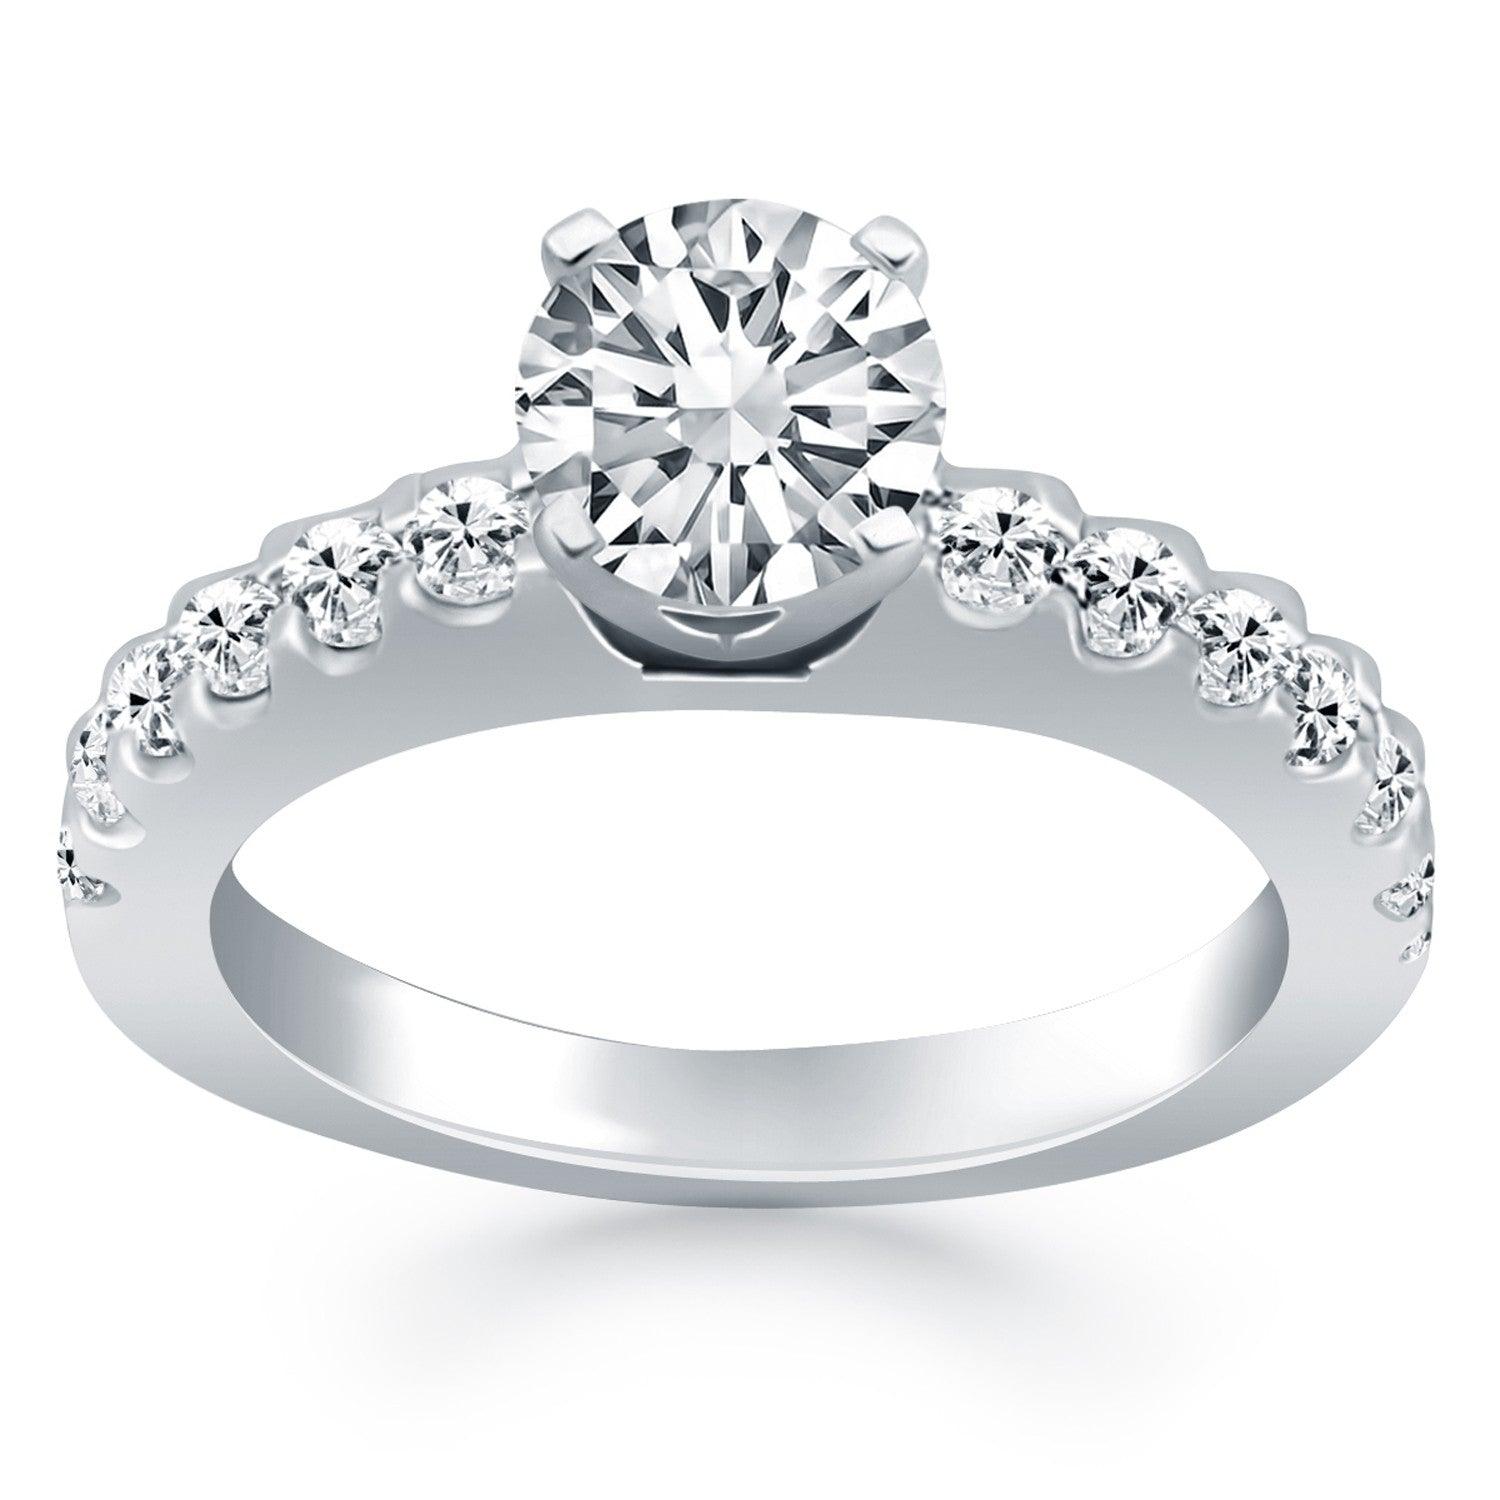 14k White Gold Diamond Micro Prong Cathedral Engagement Ring freeshipping - Higher Class Elegance